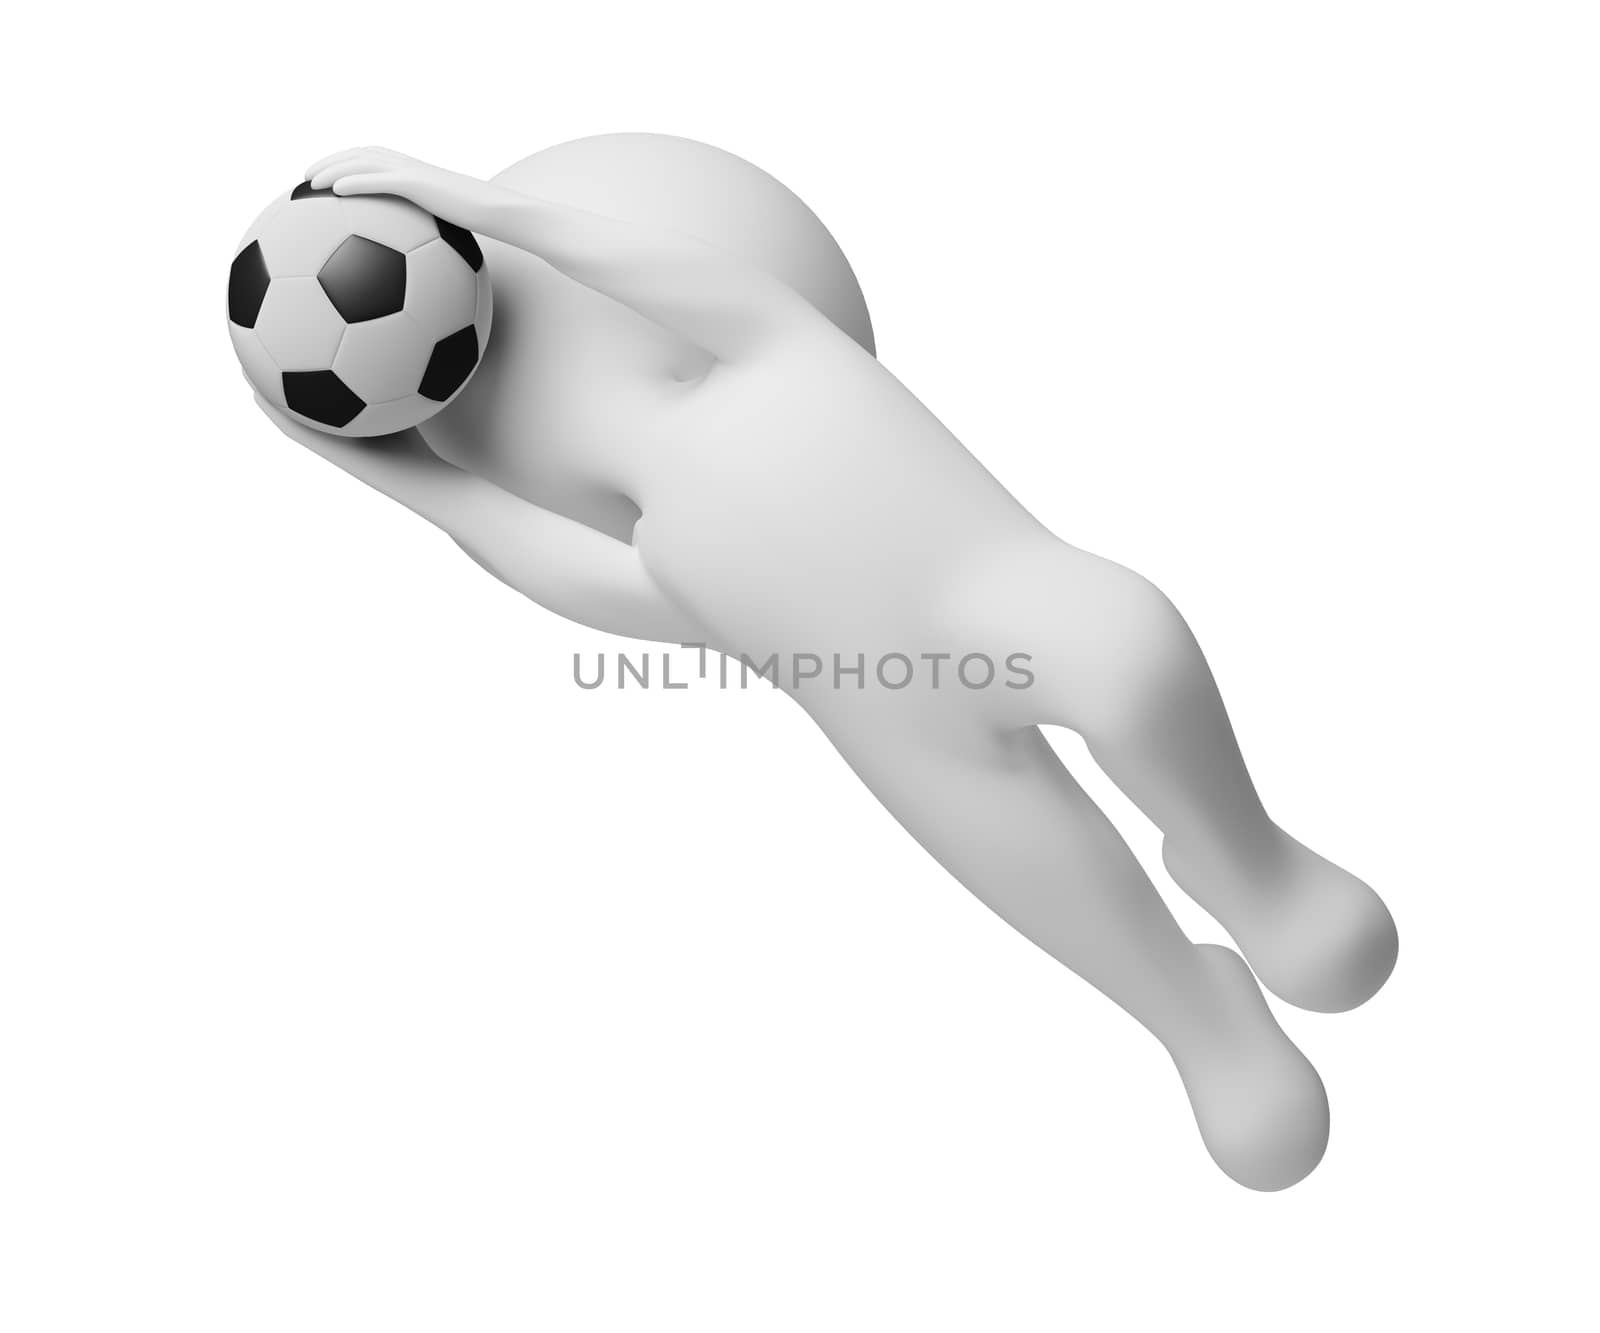 3d small people - goalkeeper a catching ball. 3d image. Isolated white background.